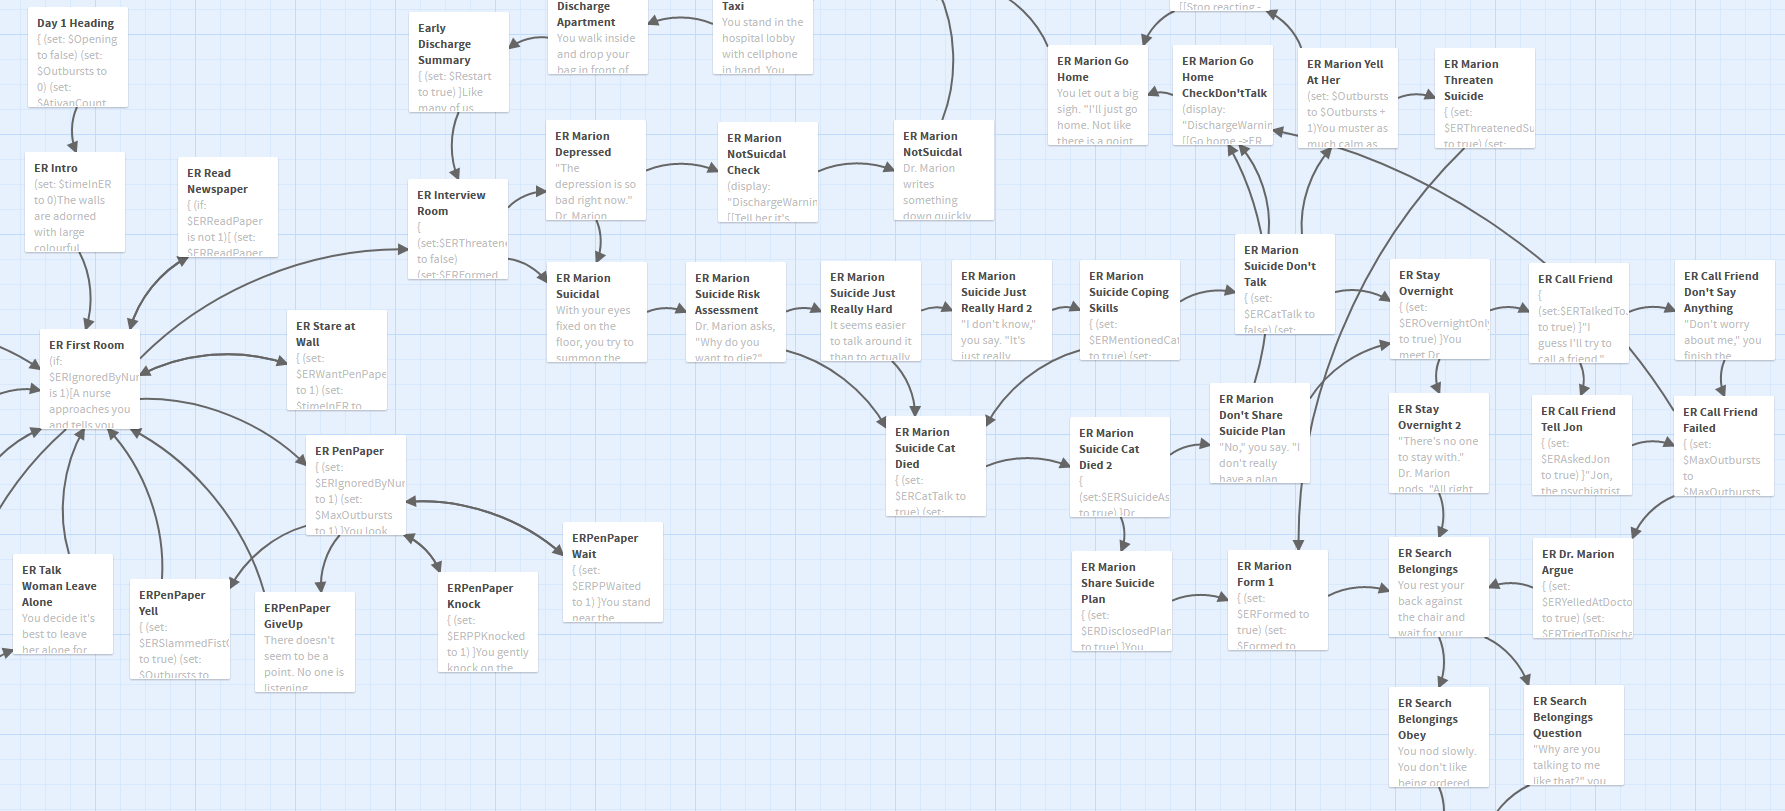 Twine screenshot showing many branching paths of the game "Inpatient".